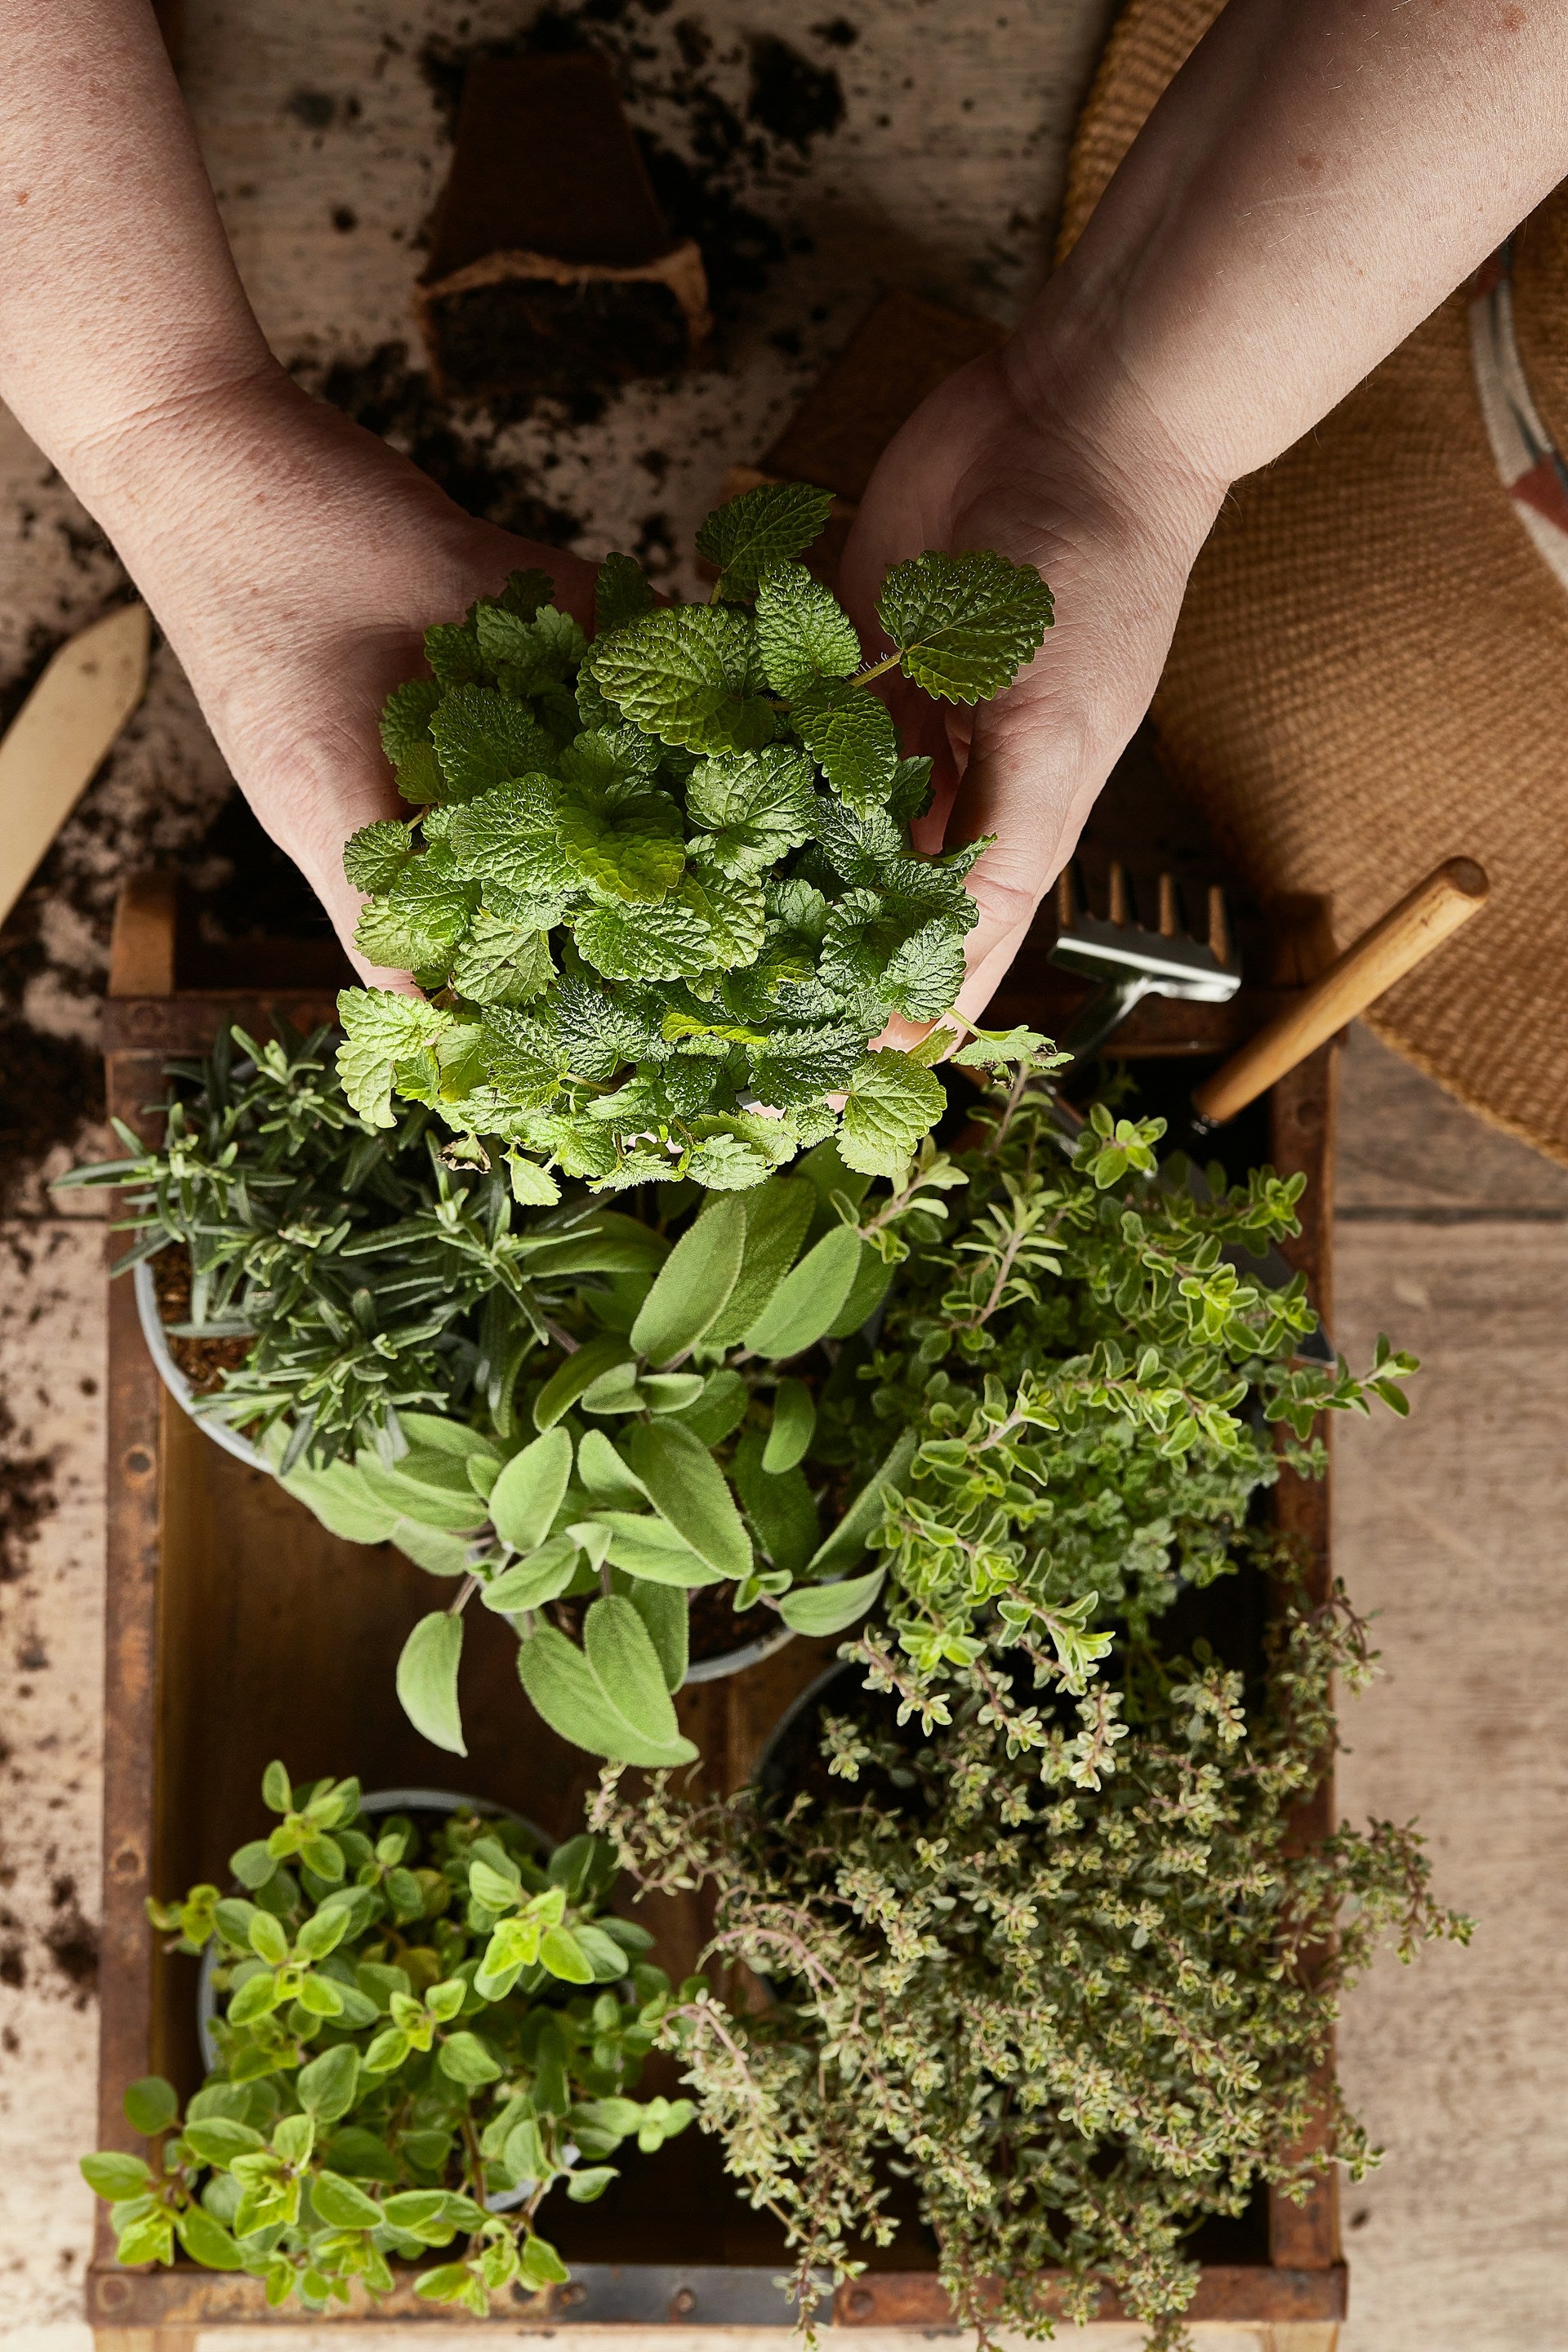 An aerial image of two hands holding a pot of herbs above a box of potted herb plants